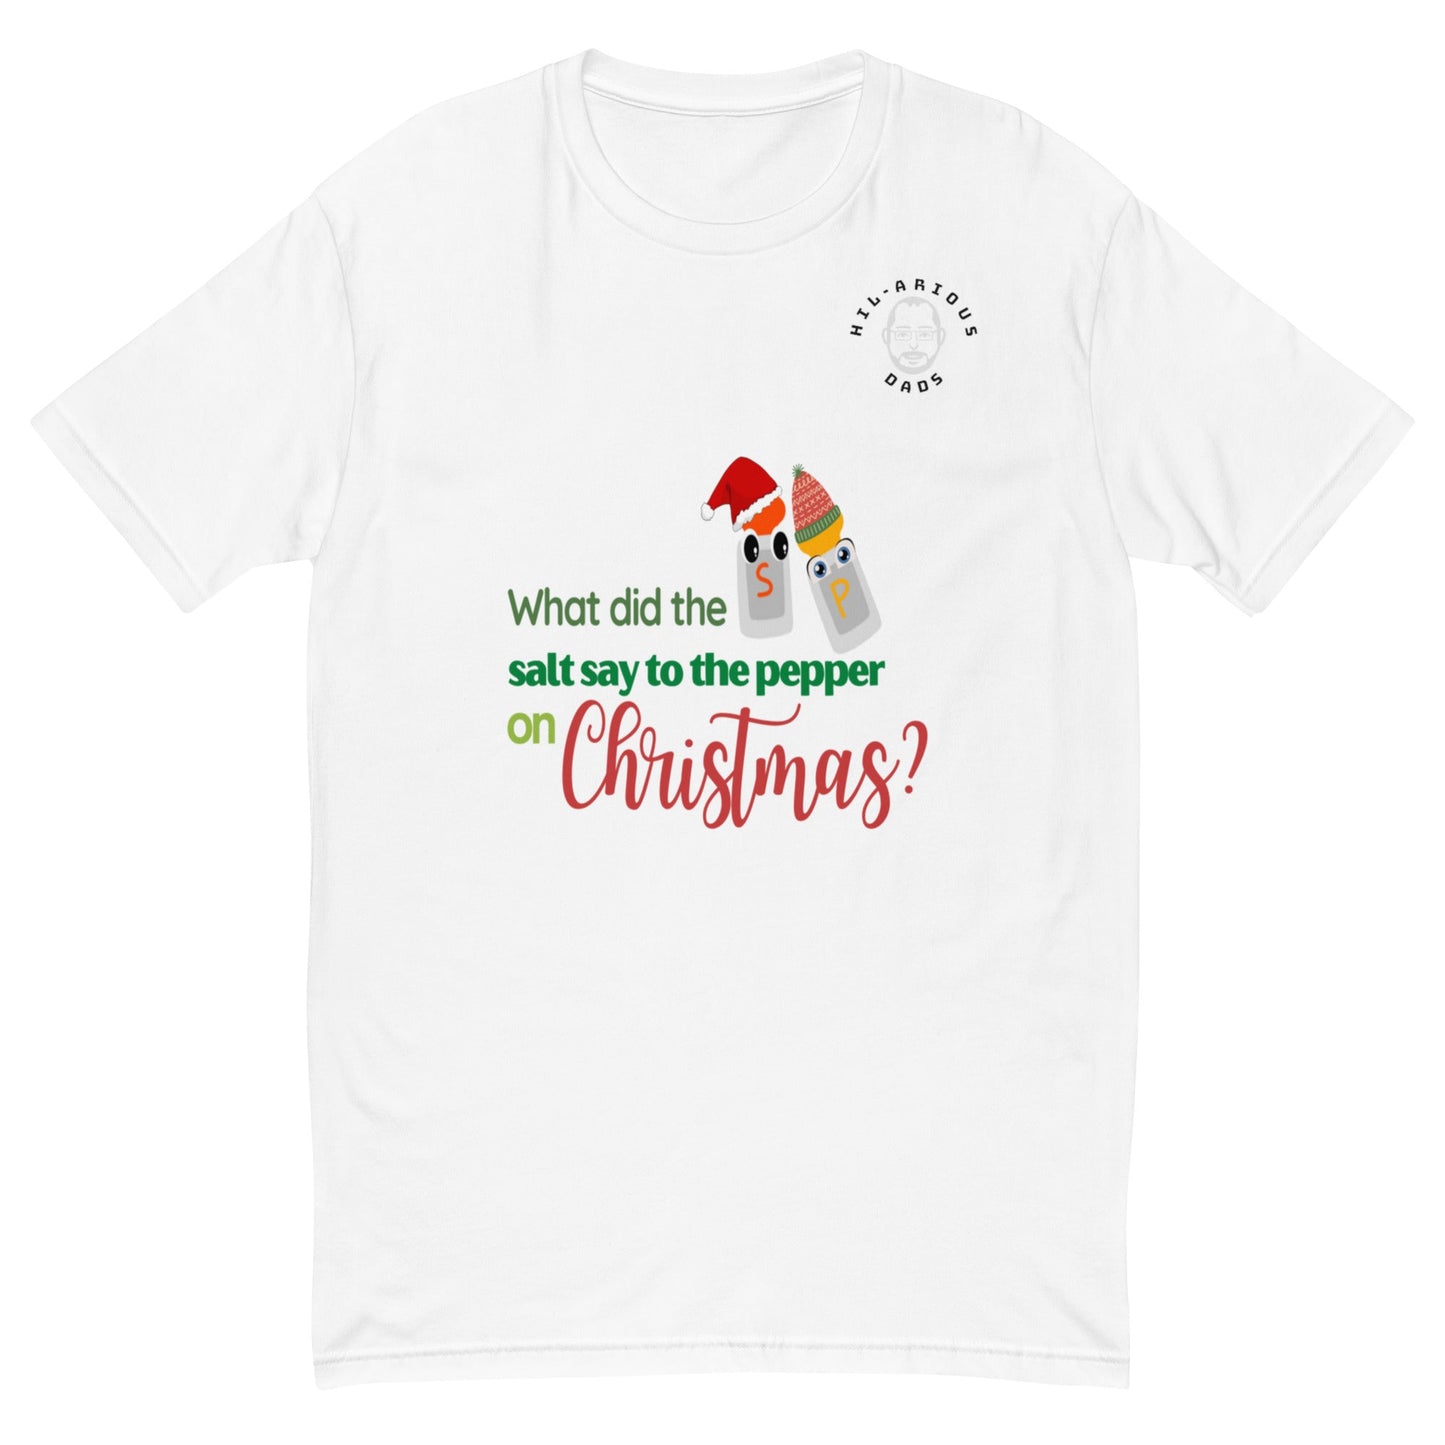 What did the salt say to the pepper on Christmas?-T-shirt - Hil-arious Dads